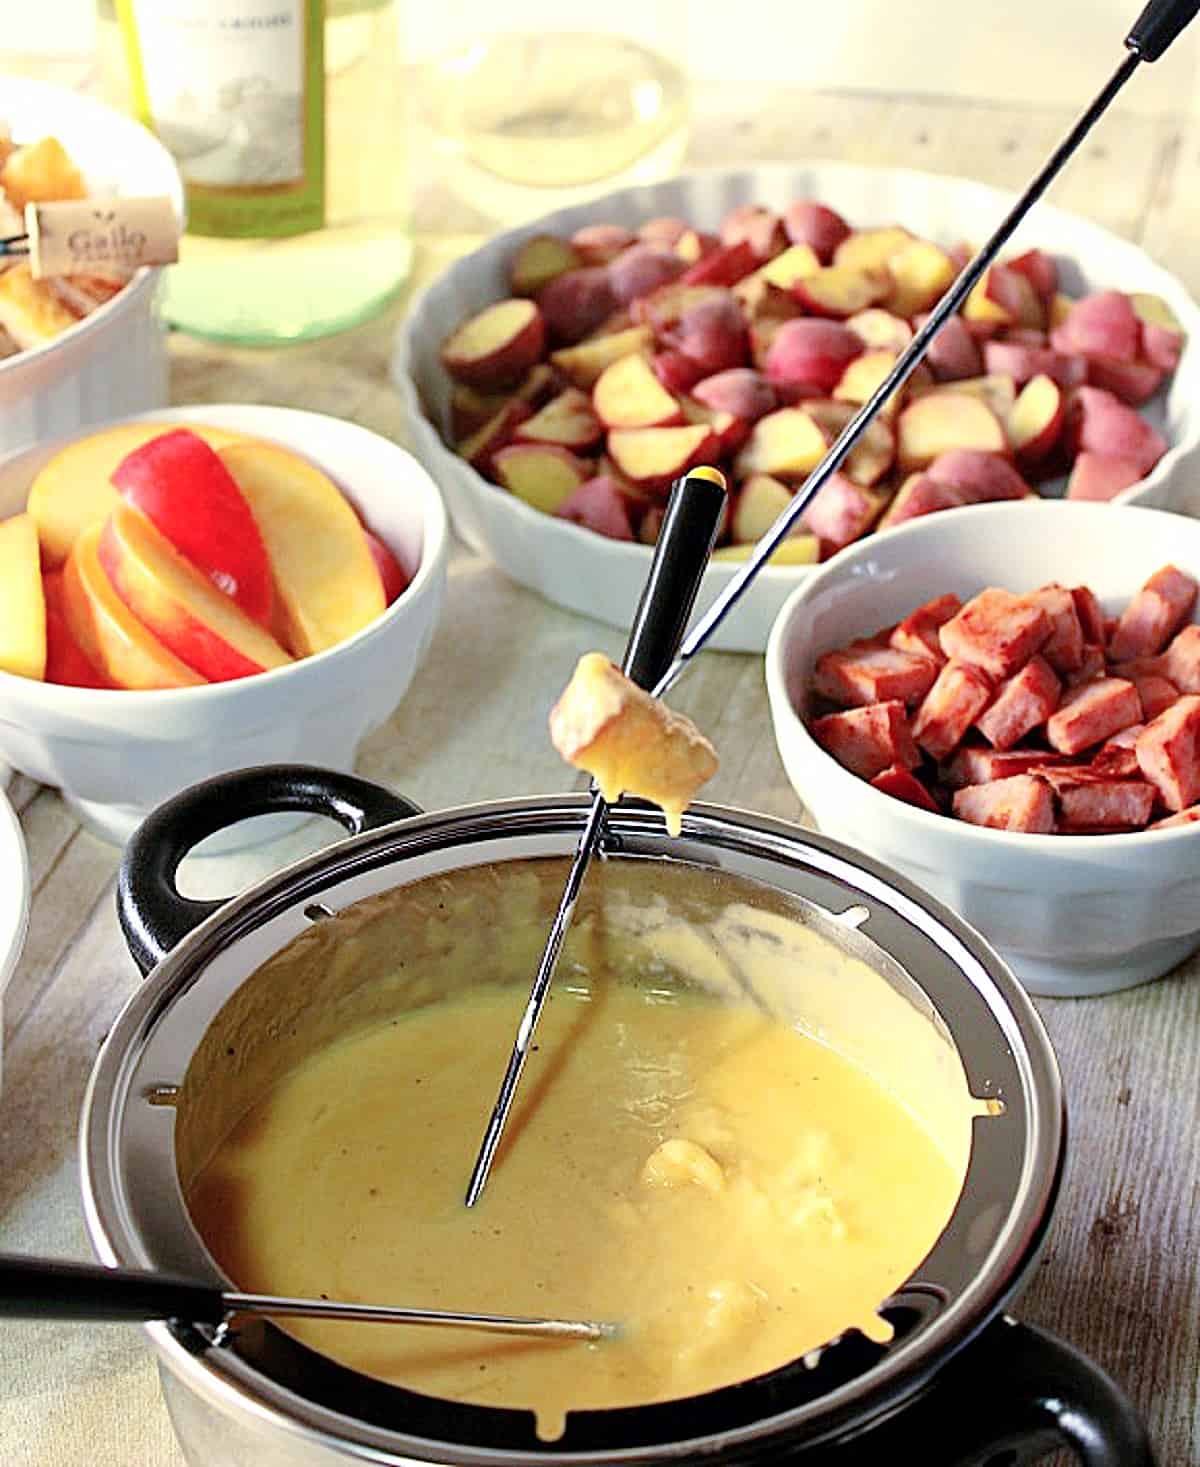 Fondue forks inside a fondue pot with cheese sauce dripping off a bread cube.